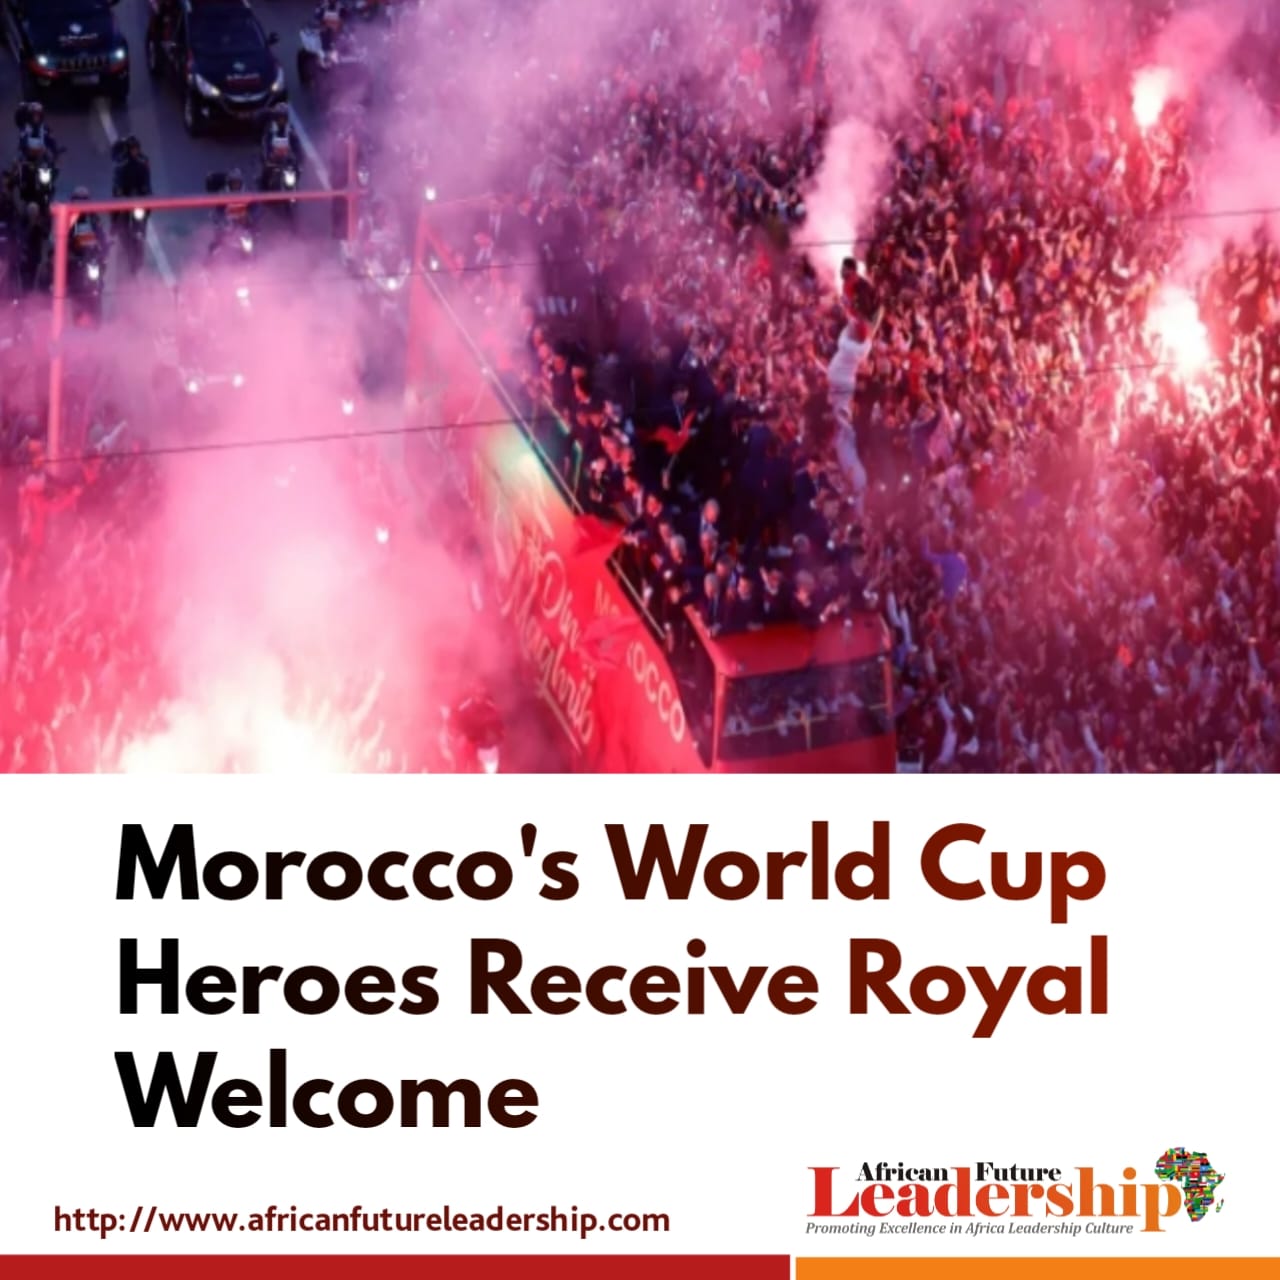 Morocco's World Cup Heroes Receive Royal Welcome